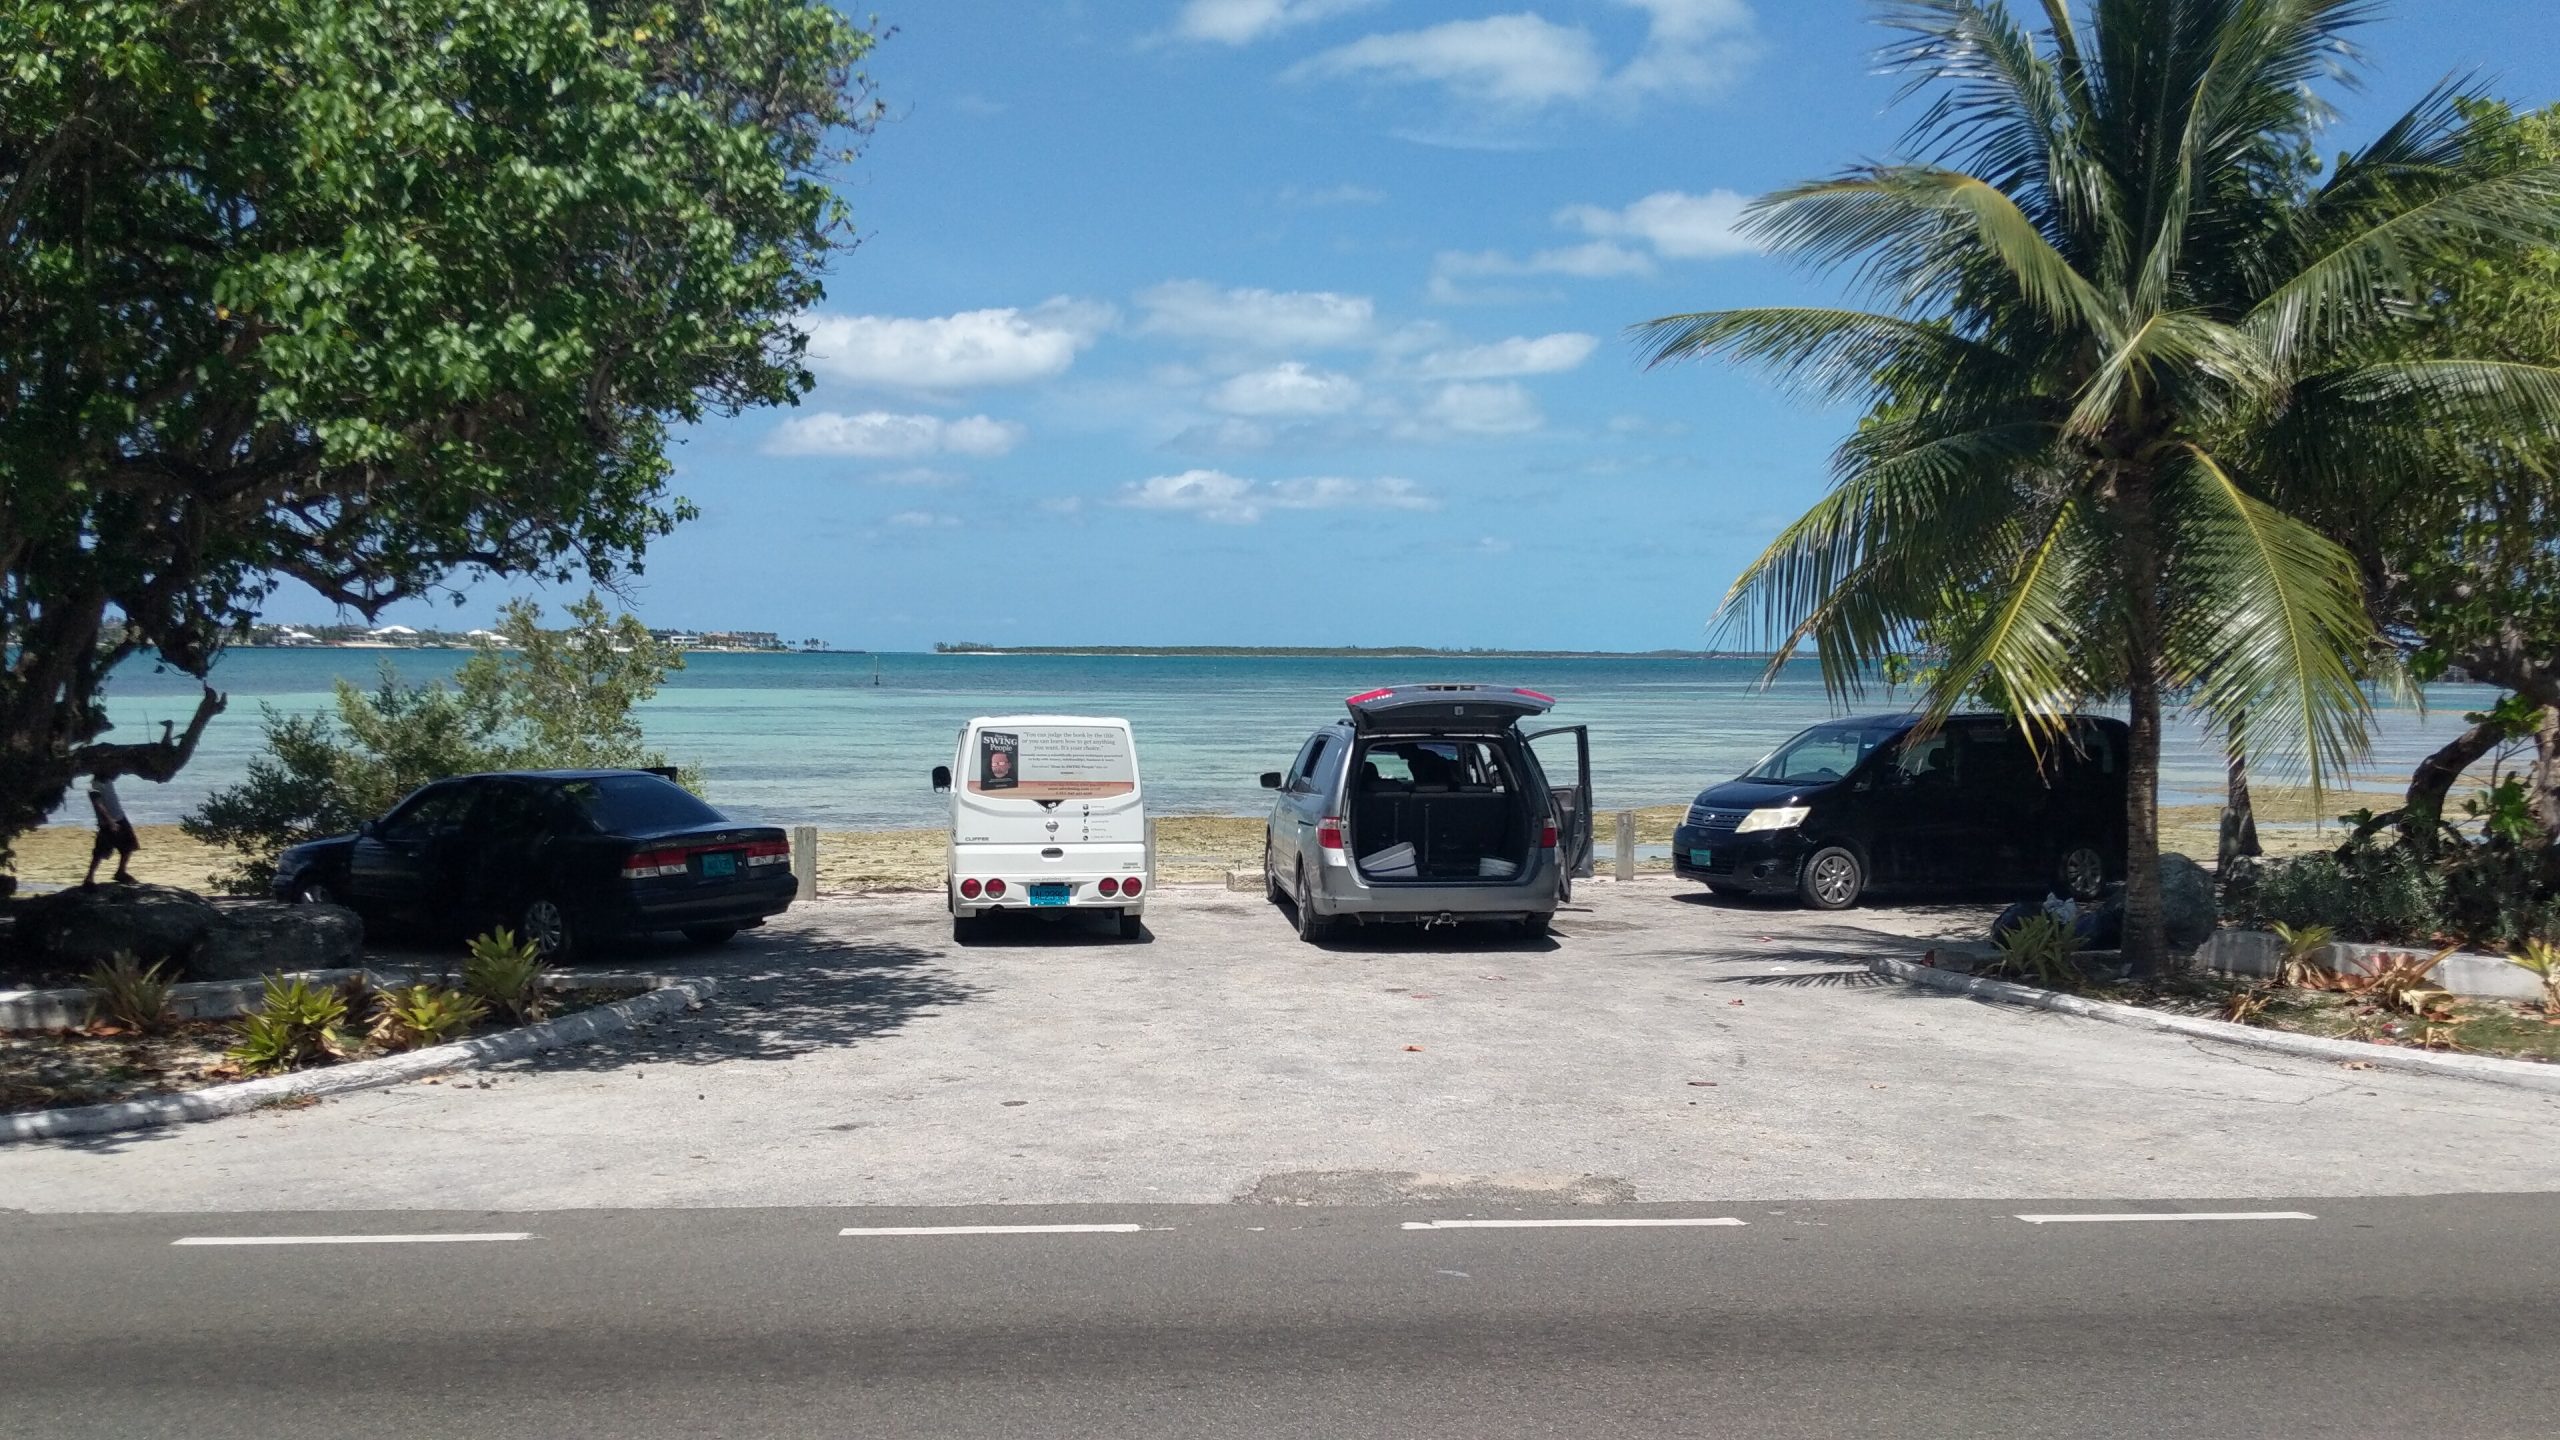 The busy little parking spot at Montague Beach where waited to meet my mystery subject.